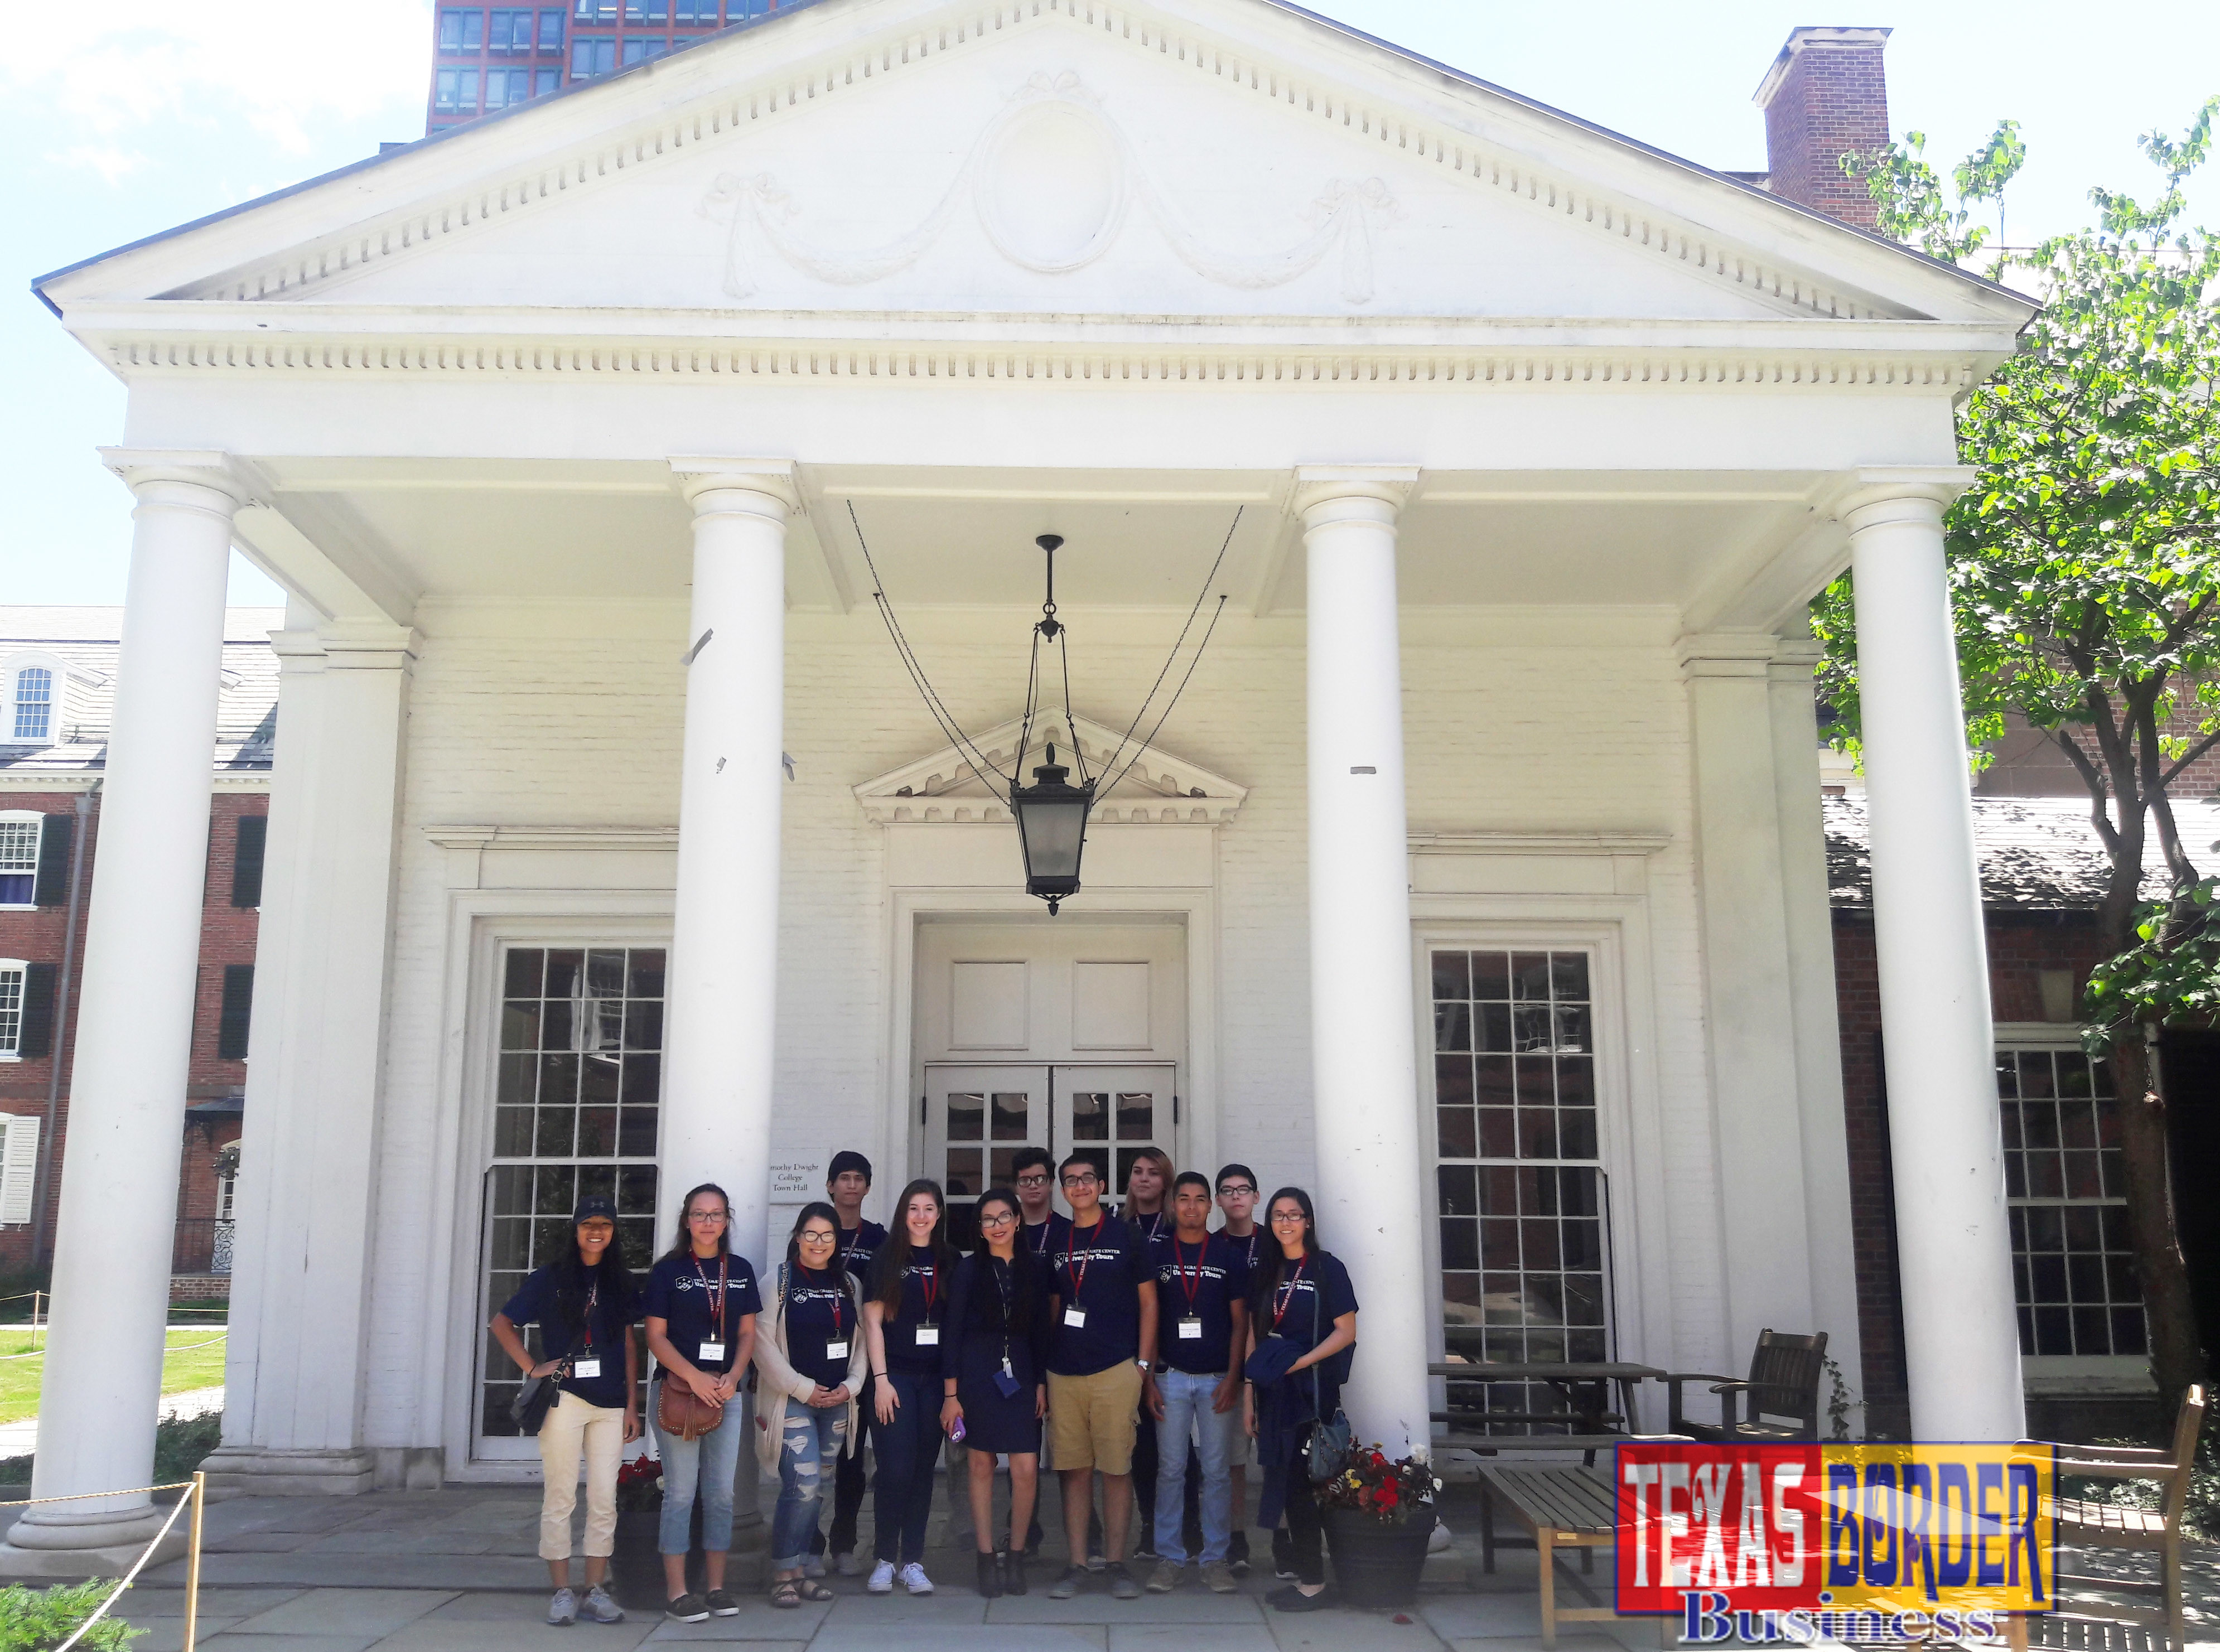 More than 30 PSJA ISD students recently visited some of our nation’s top ivy league schools as part of the PSJA & Texas Graduate Center Summer Ivy League University Tours 2016.